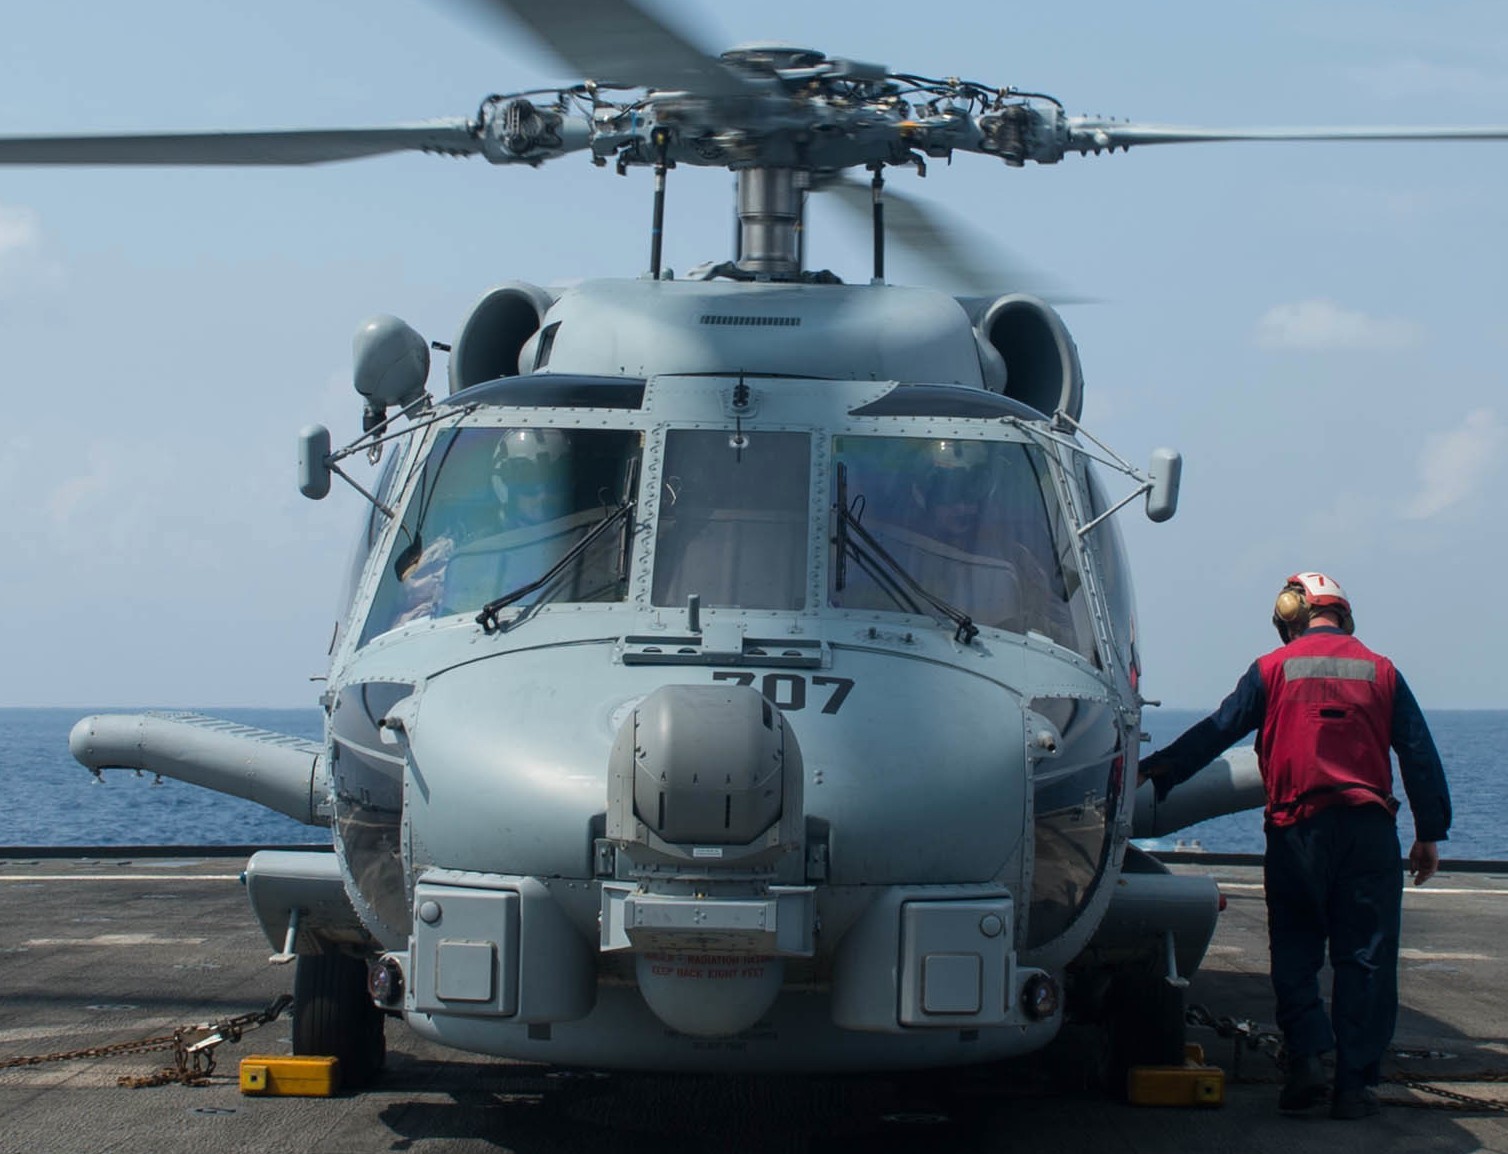 hsm-73 battlecats helicopter maritime strike squadron us navy mh-60r seahawk 2013 45